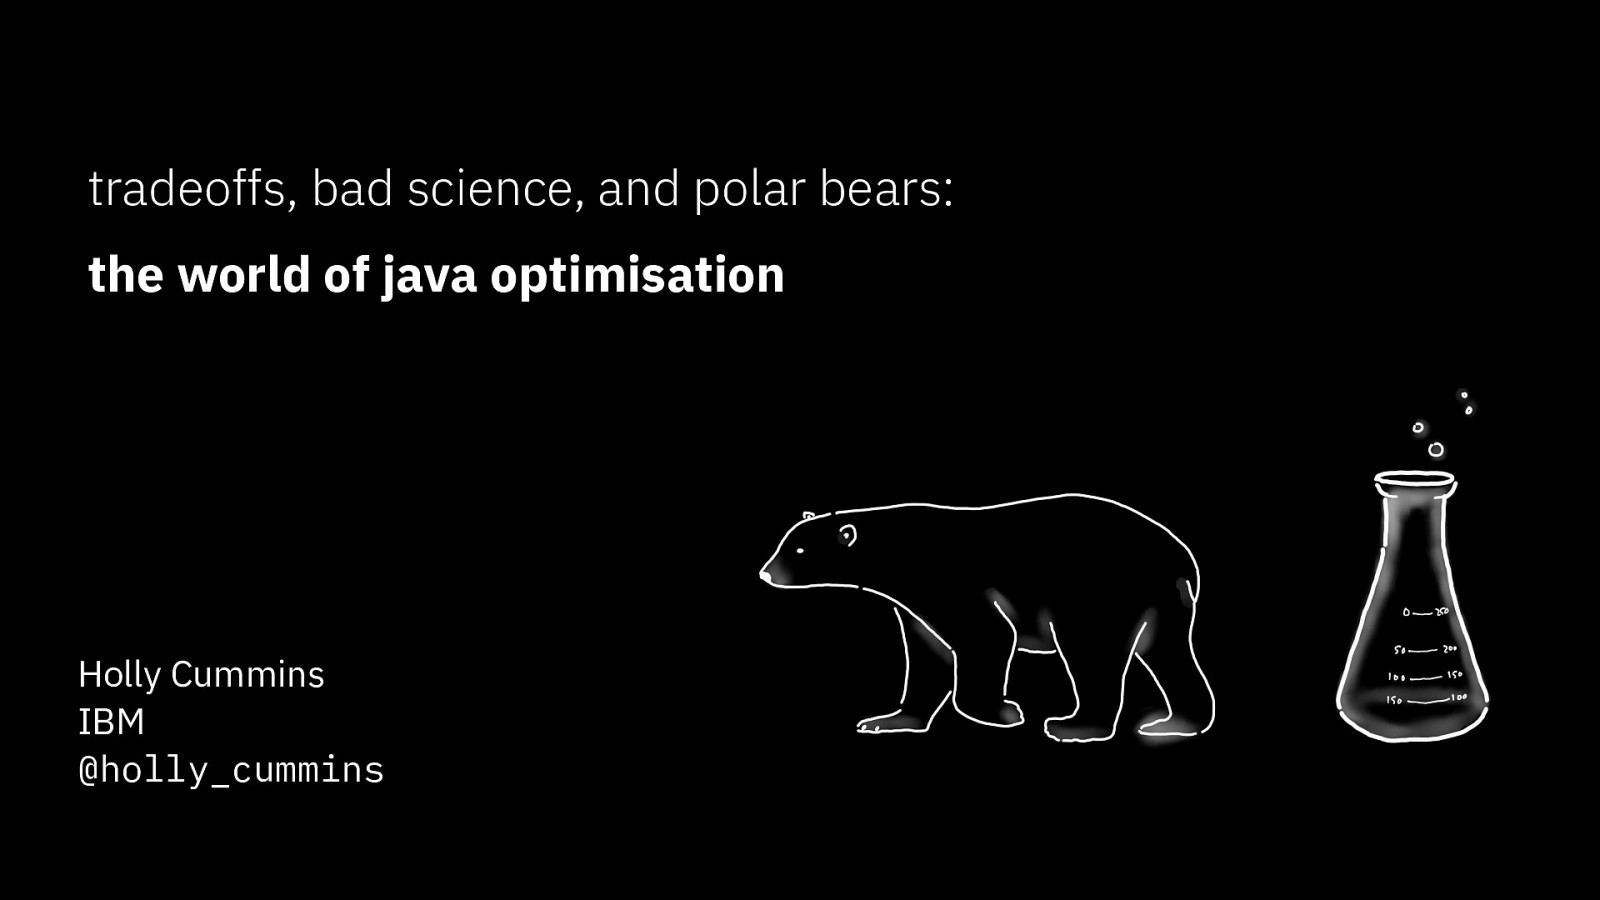 Tradeoffs, Bad Science, and Polar Bears - The World of Java Optimisation